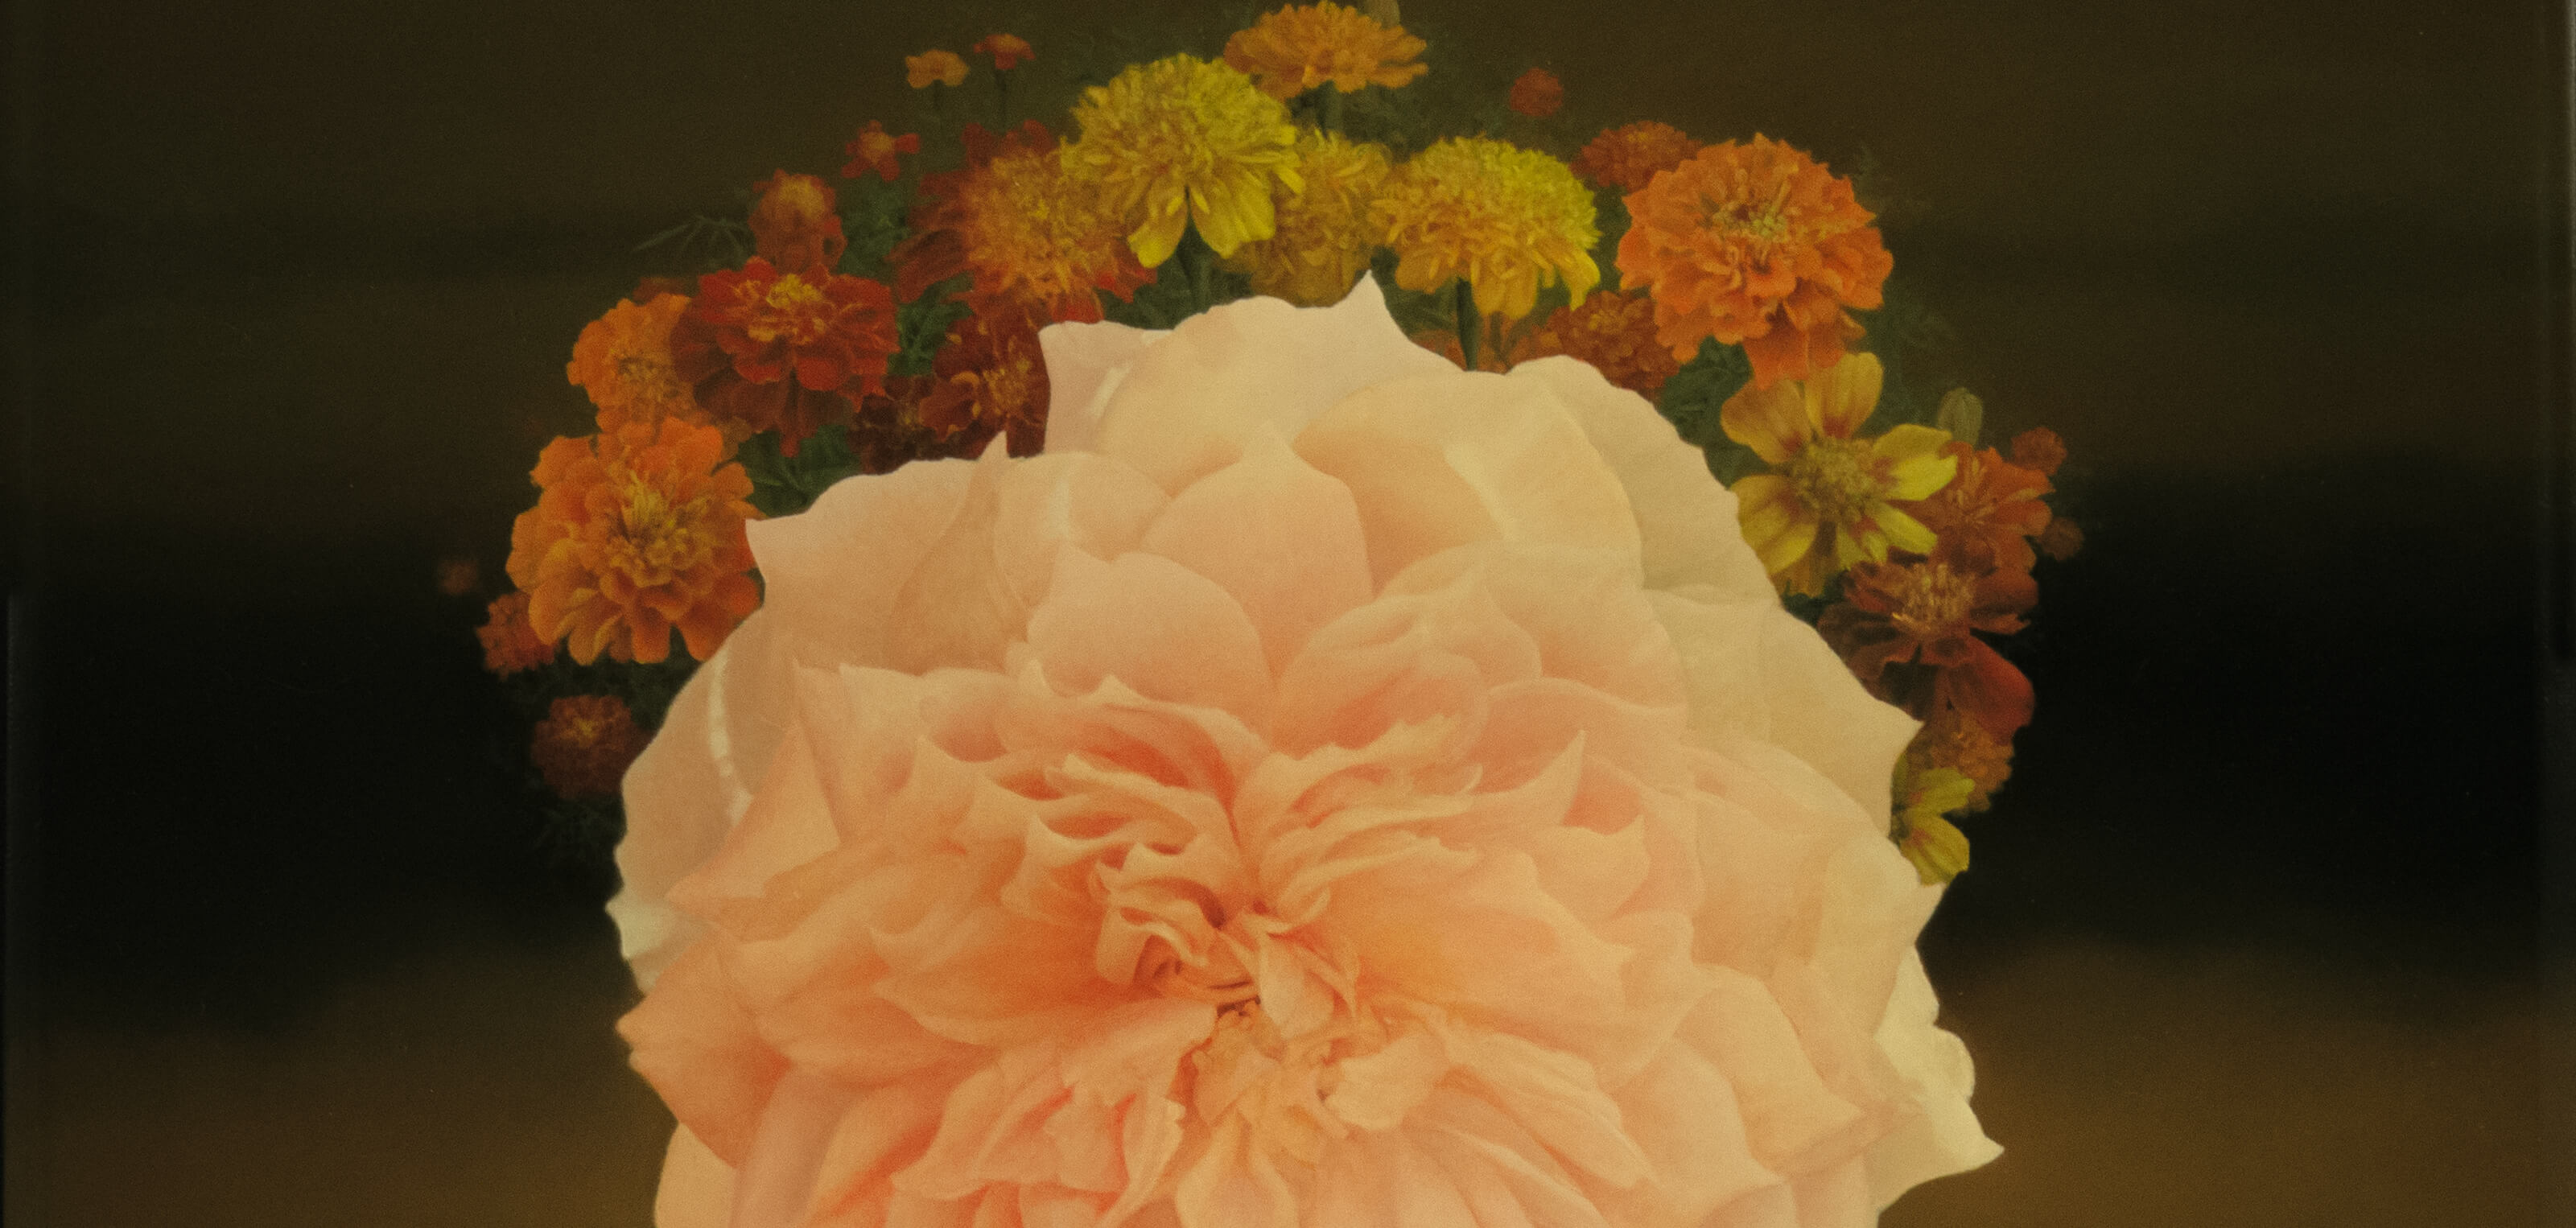 Tiara: Marigold (Detail), 
oil on linen laminated on panel, 15.5x 20.75 inches, by Holly Sears